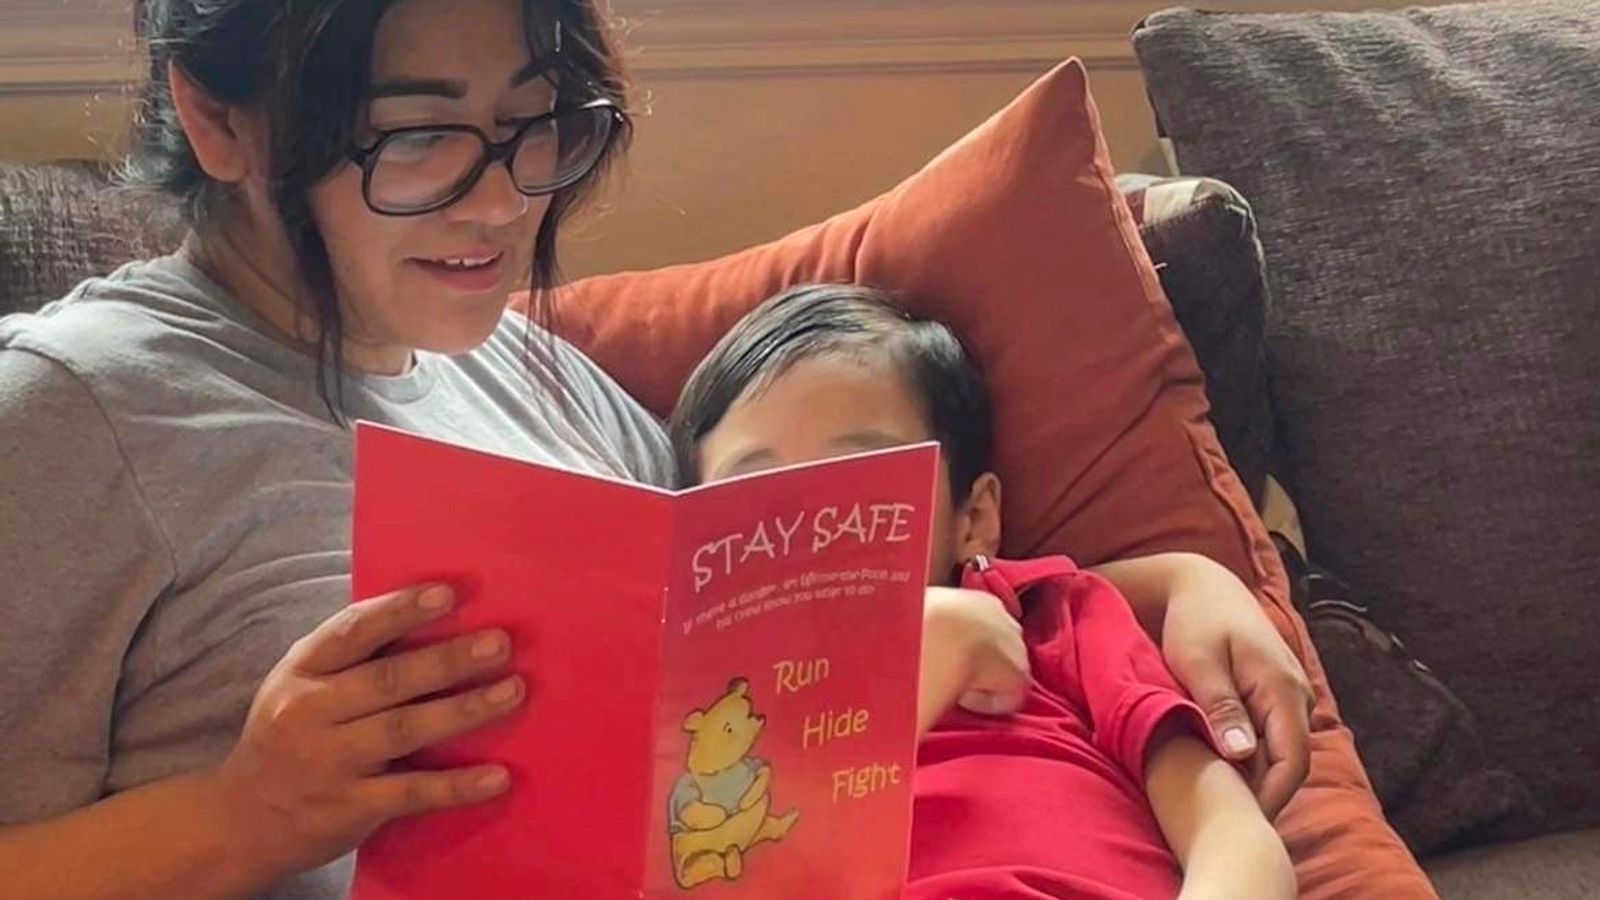 Winnie The Pooh characters used in US school district's mass shootings safety book